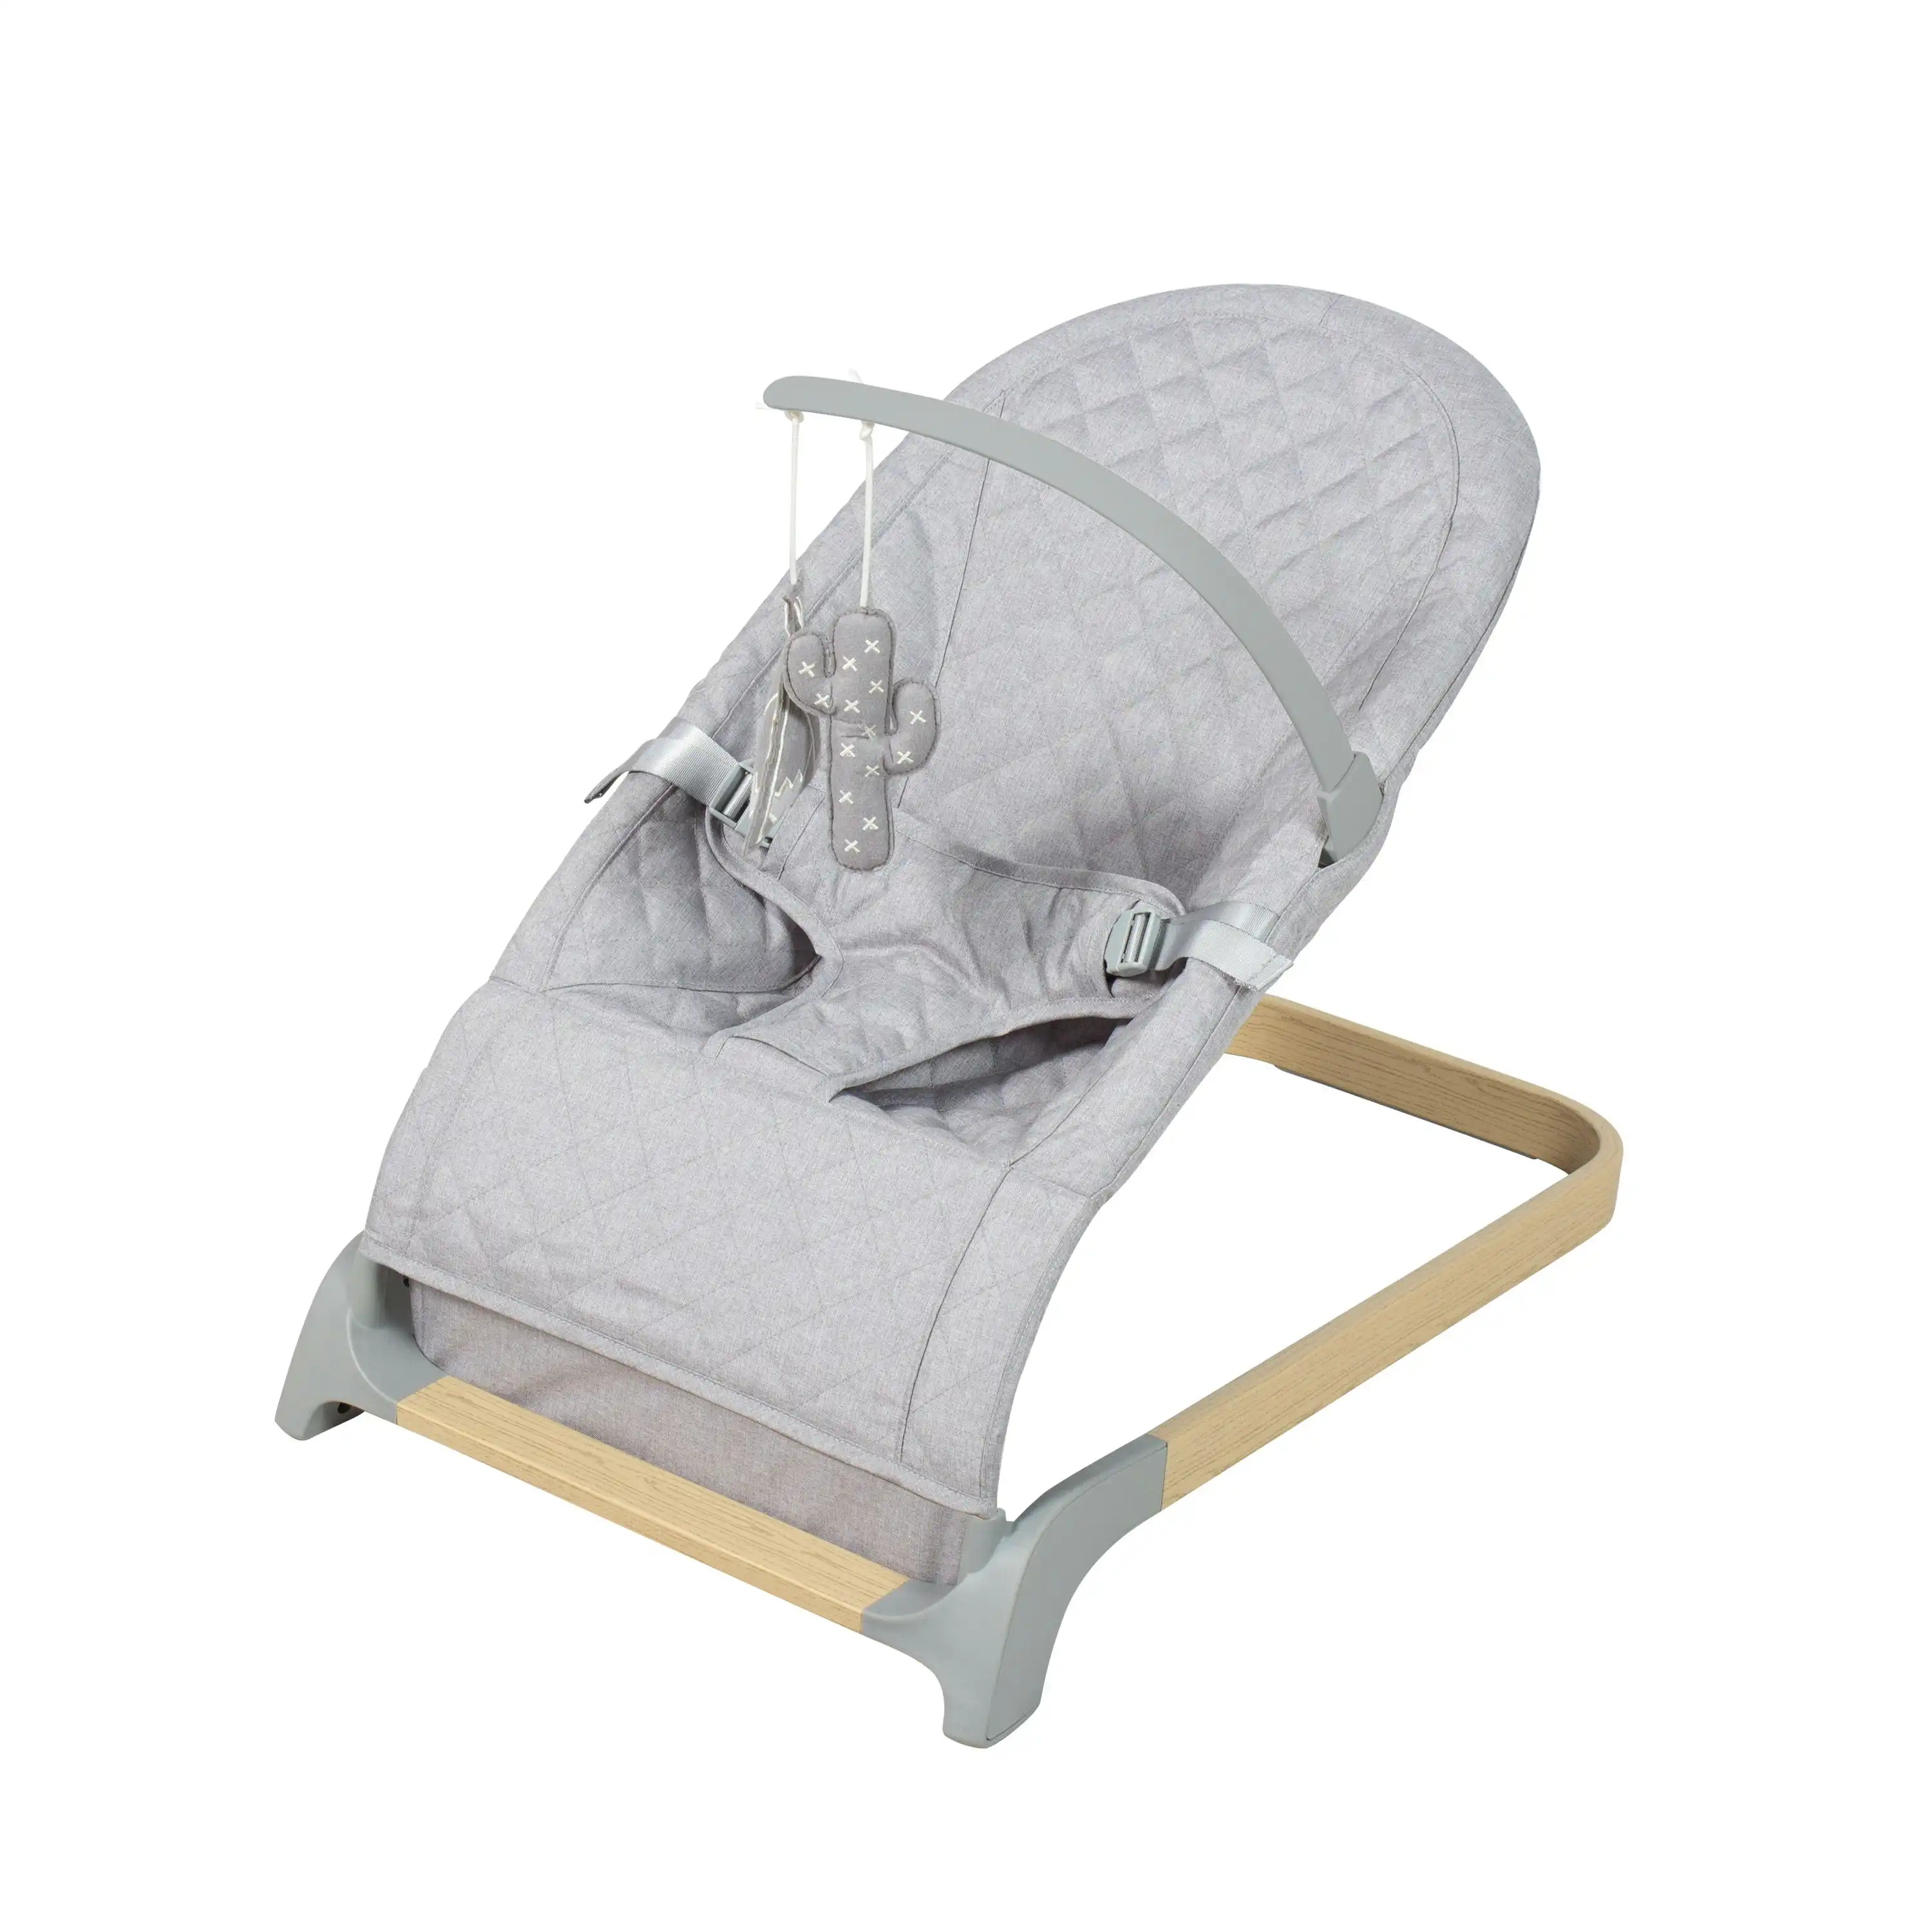 Childcare Comfy Baby Bouncer Newborn Infant Play Time Rocker - Moon Mist